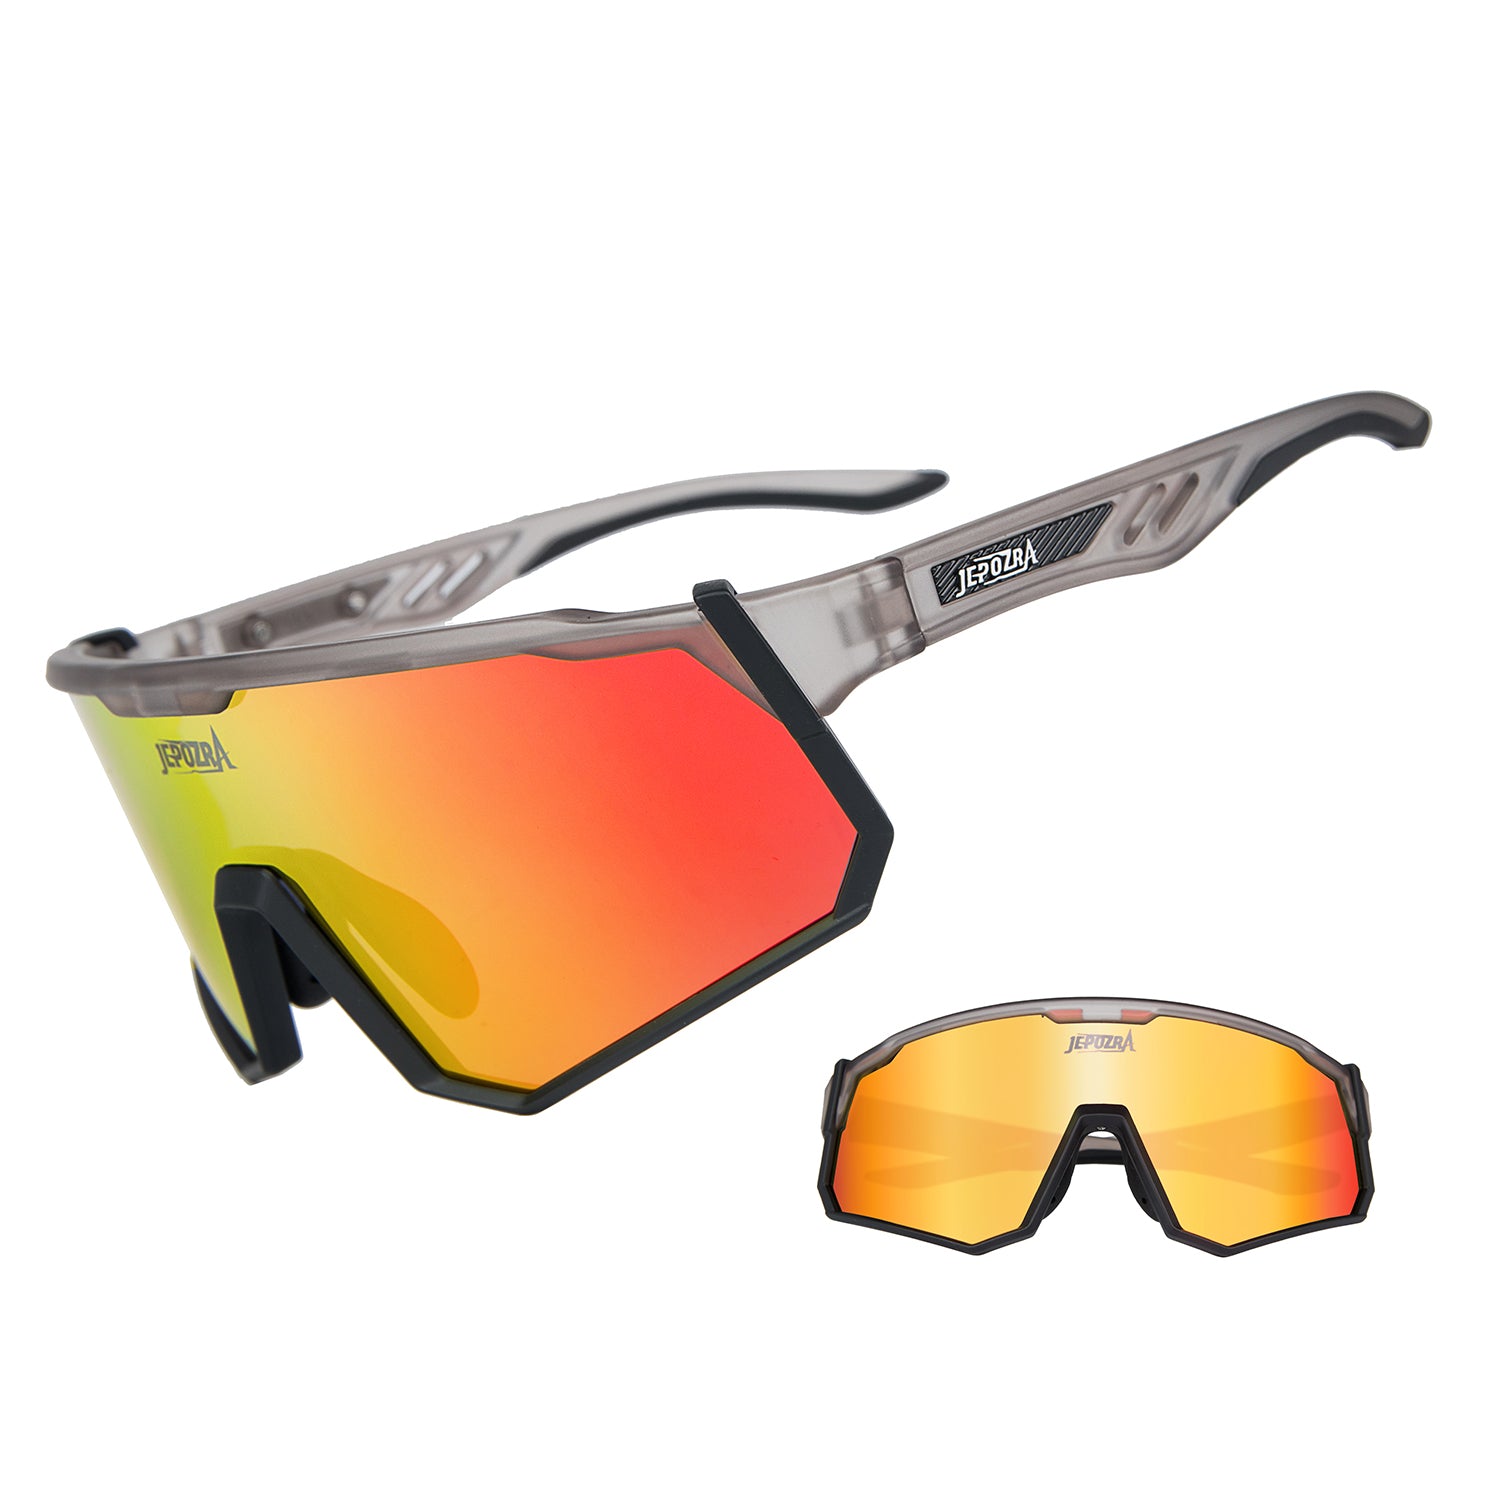 JEPOZRA Polarized Cycling Glasses with 4 Interchangeable Lenses